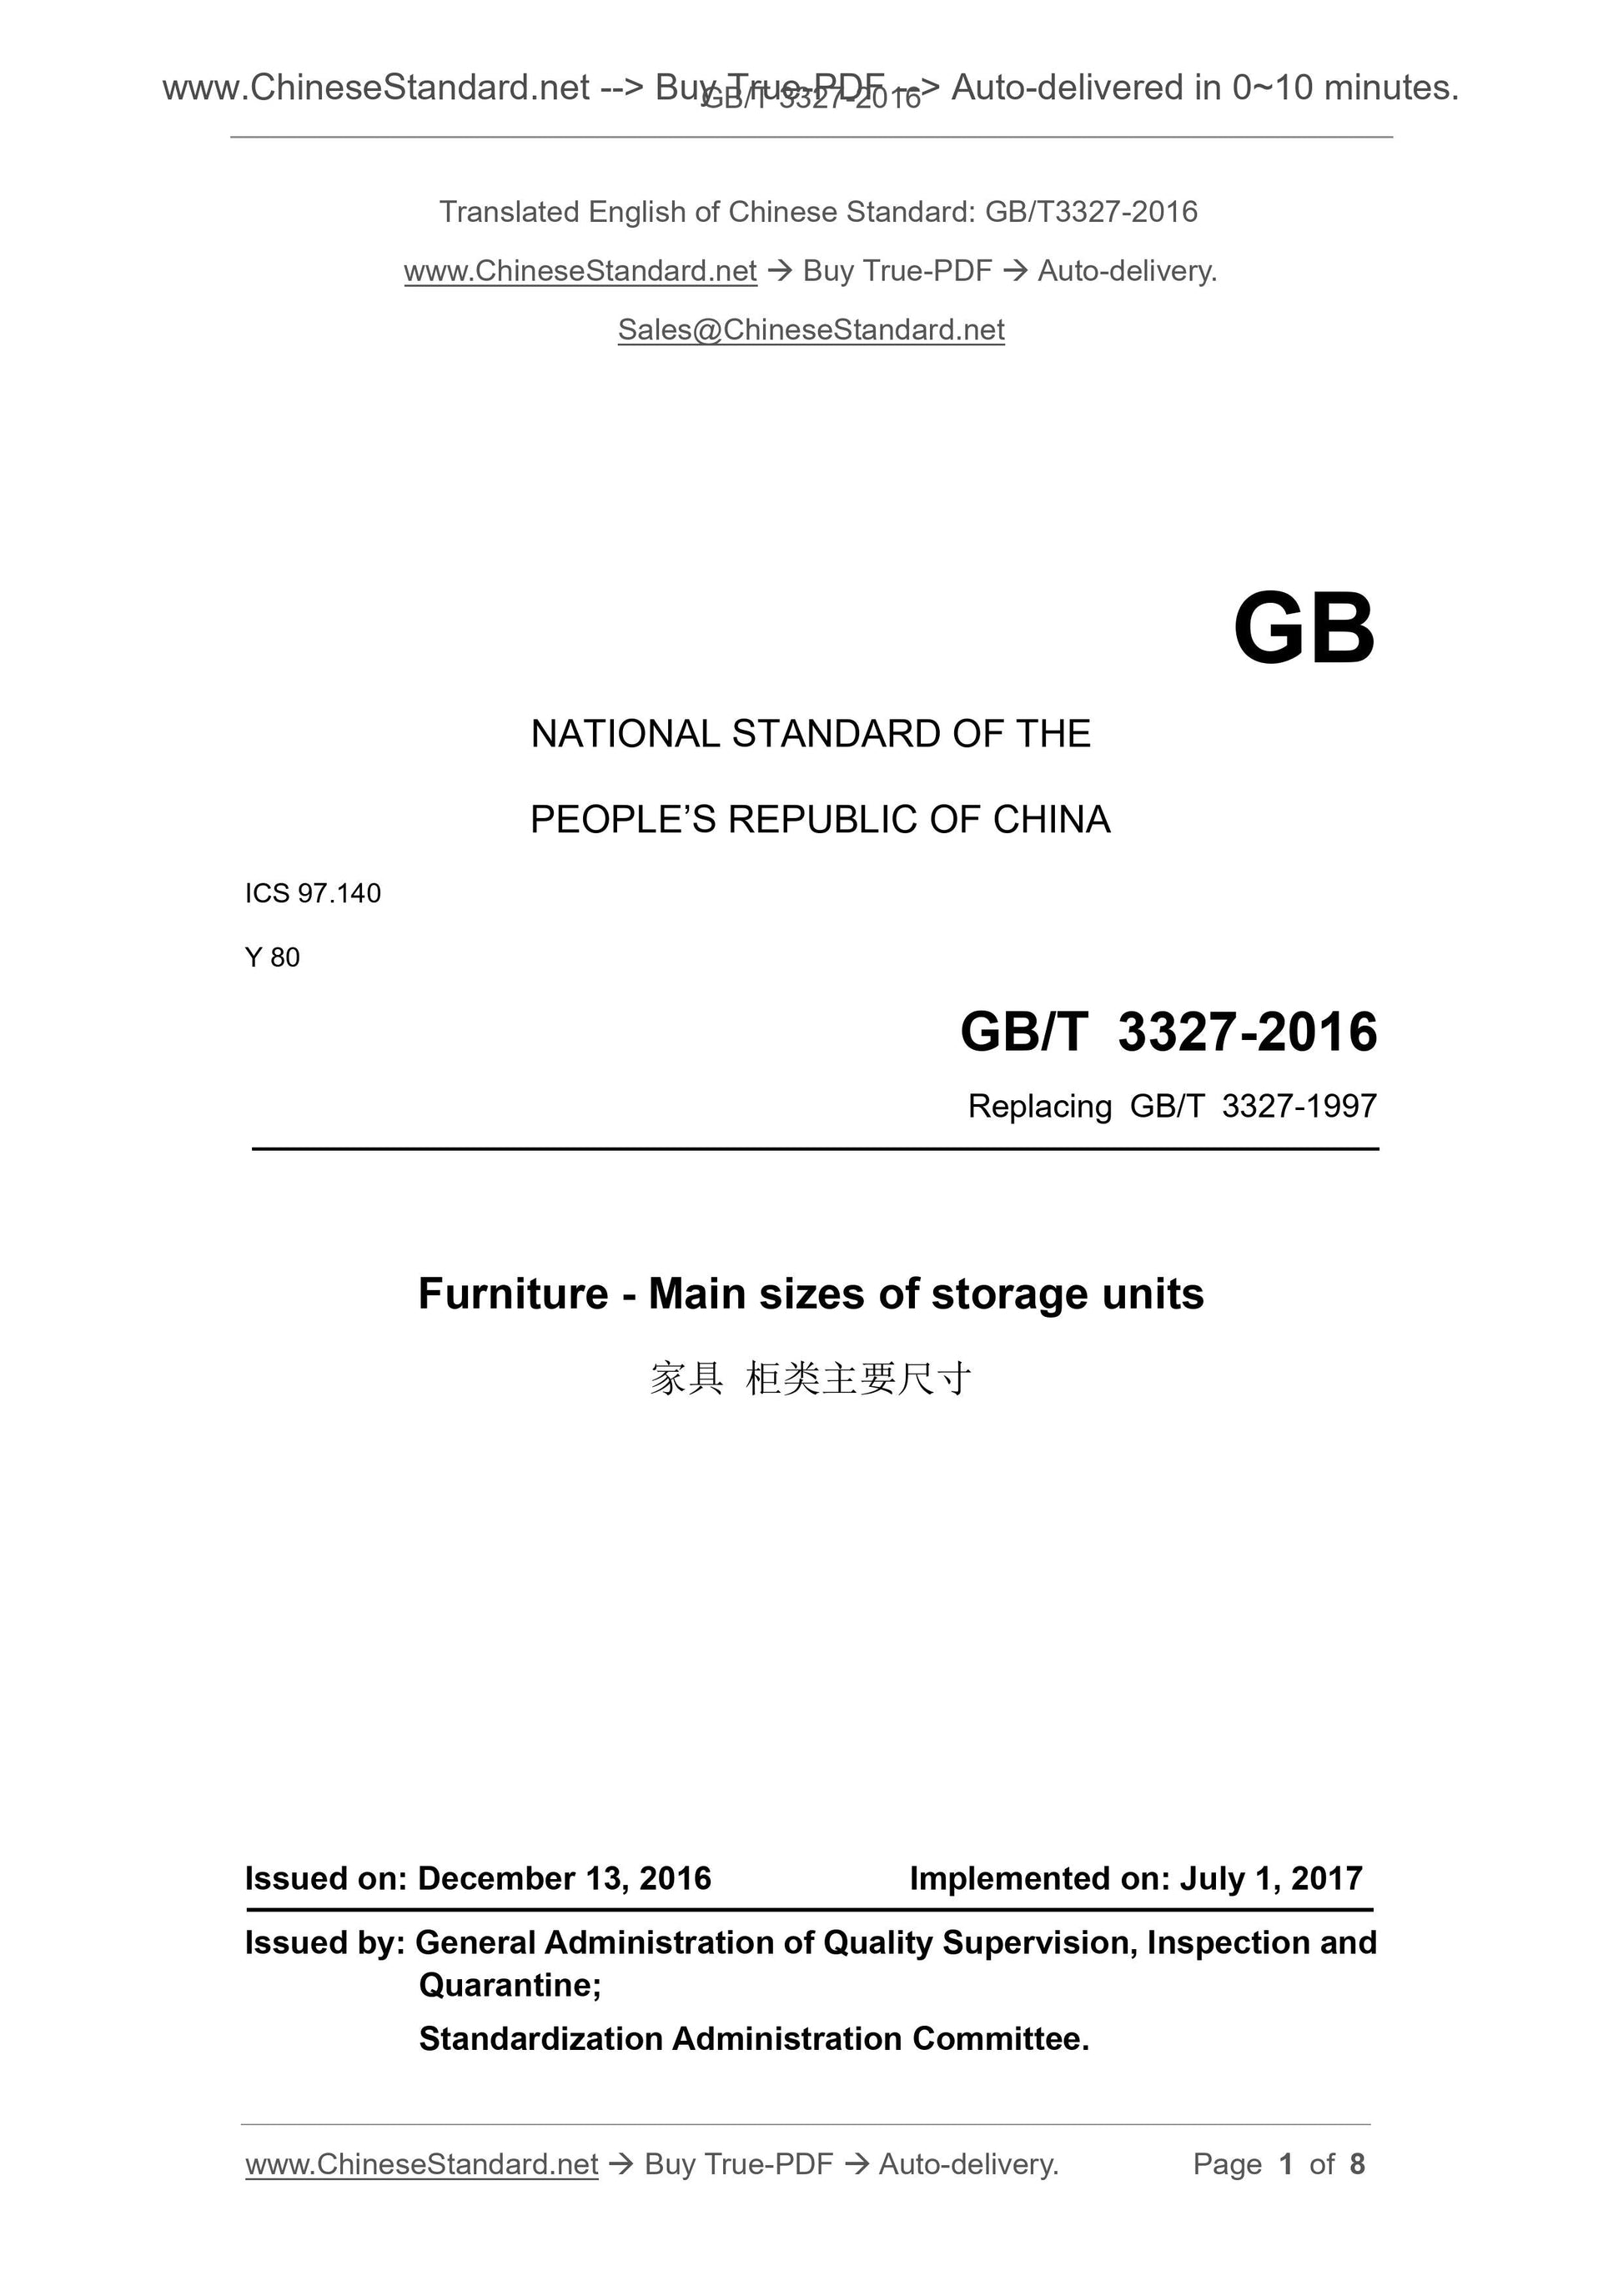 GB/T 3327-2016 Page 1